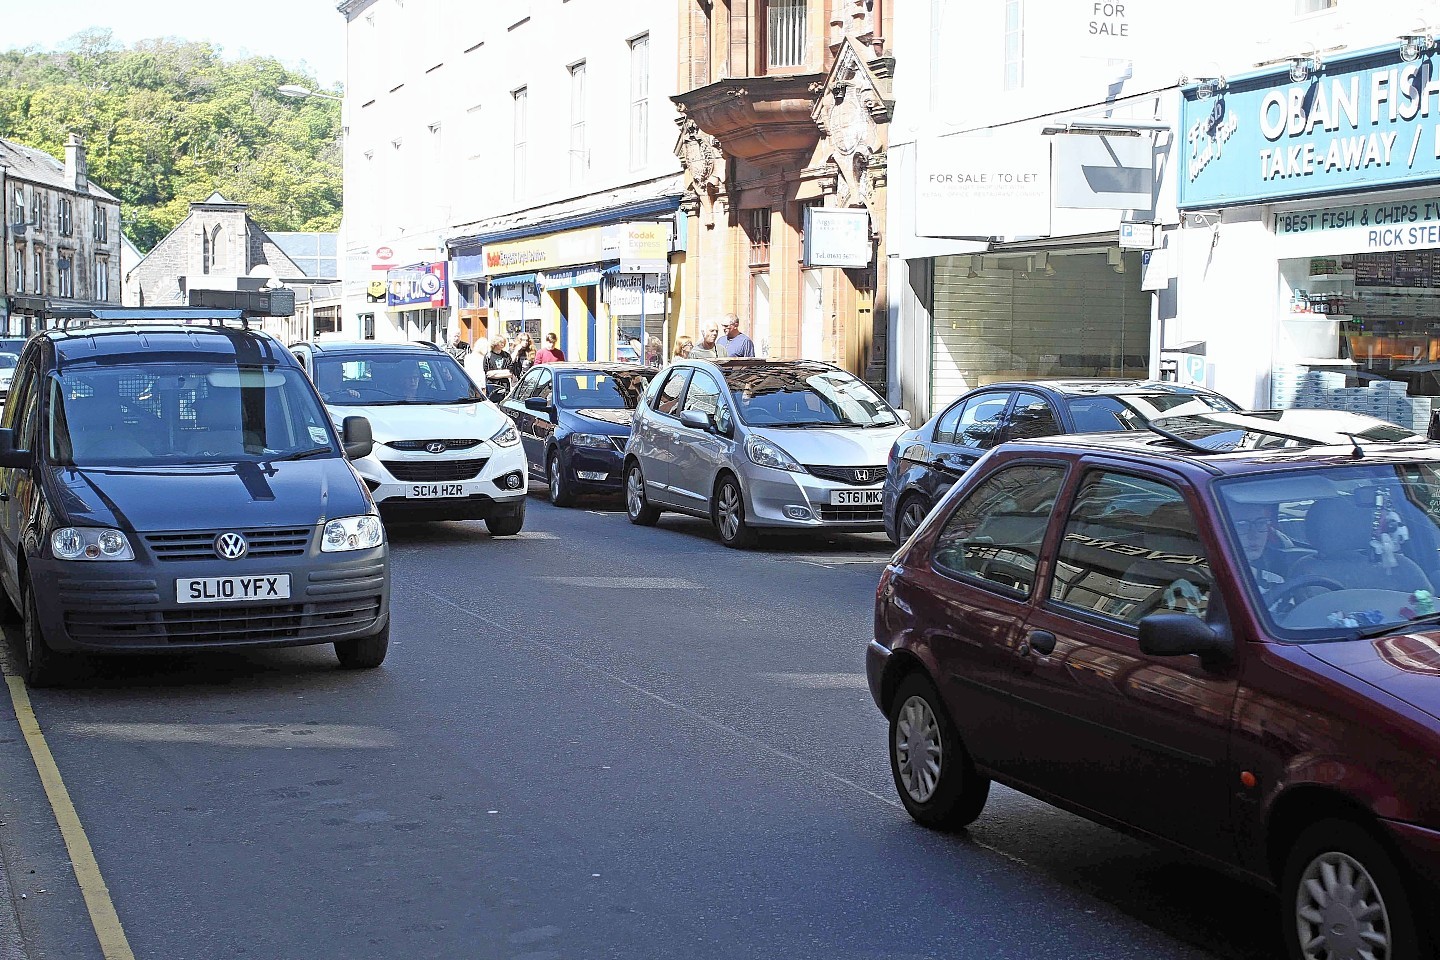 Community Councillors complained about parking in the town.